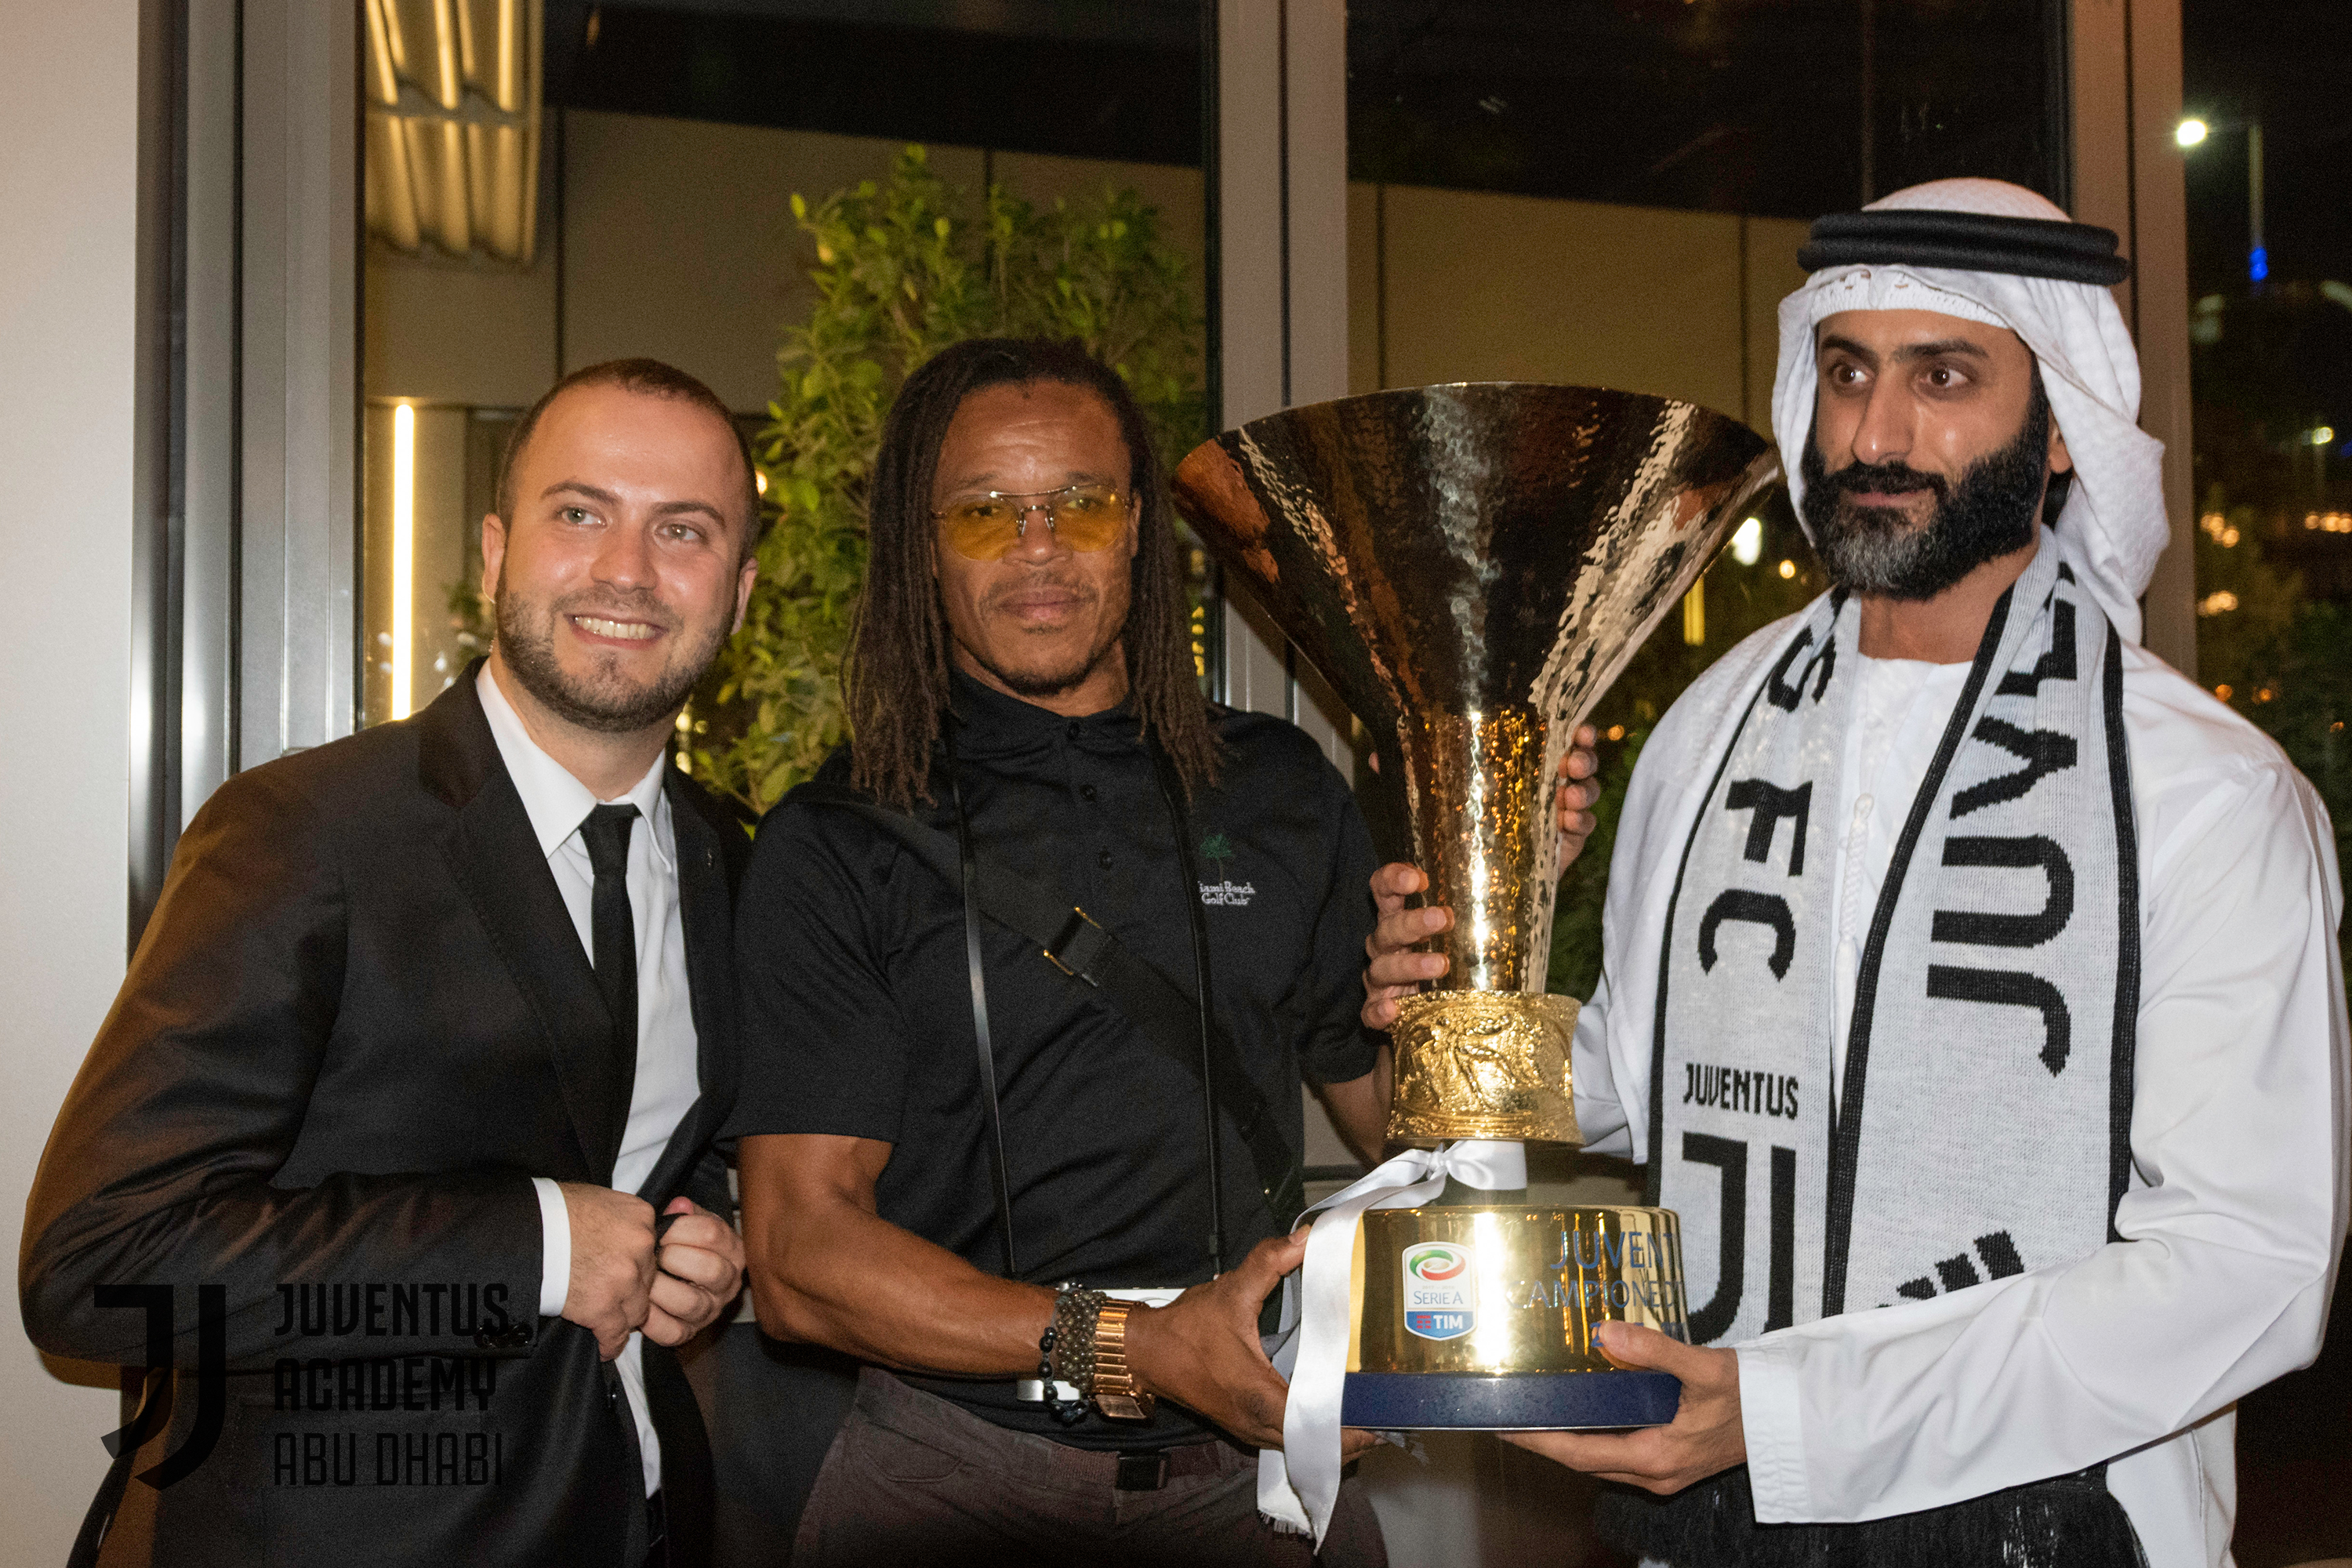 Juventus Legend & Cup Tour in the UAE with Edgar Davids